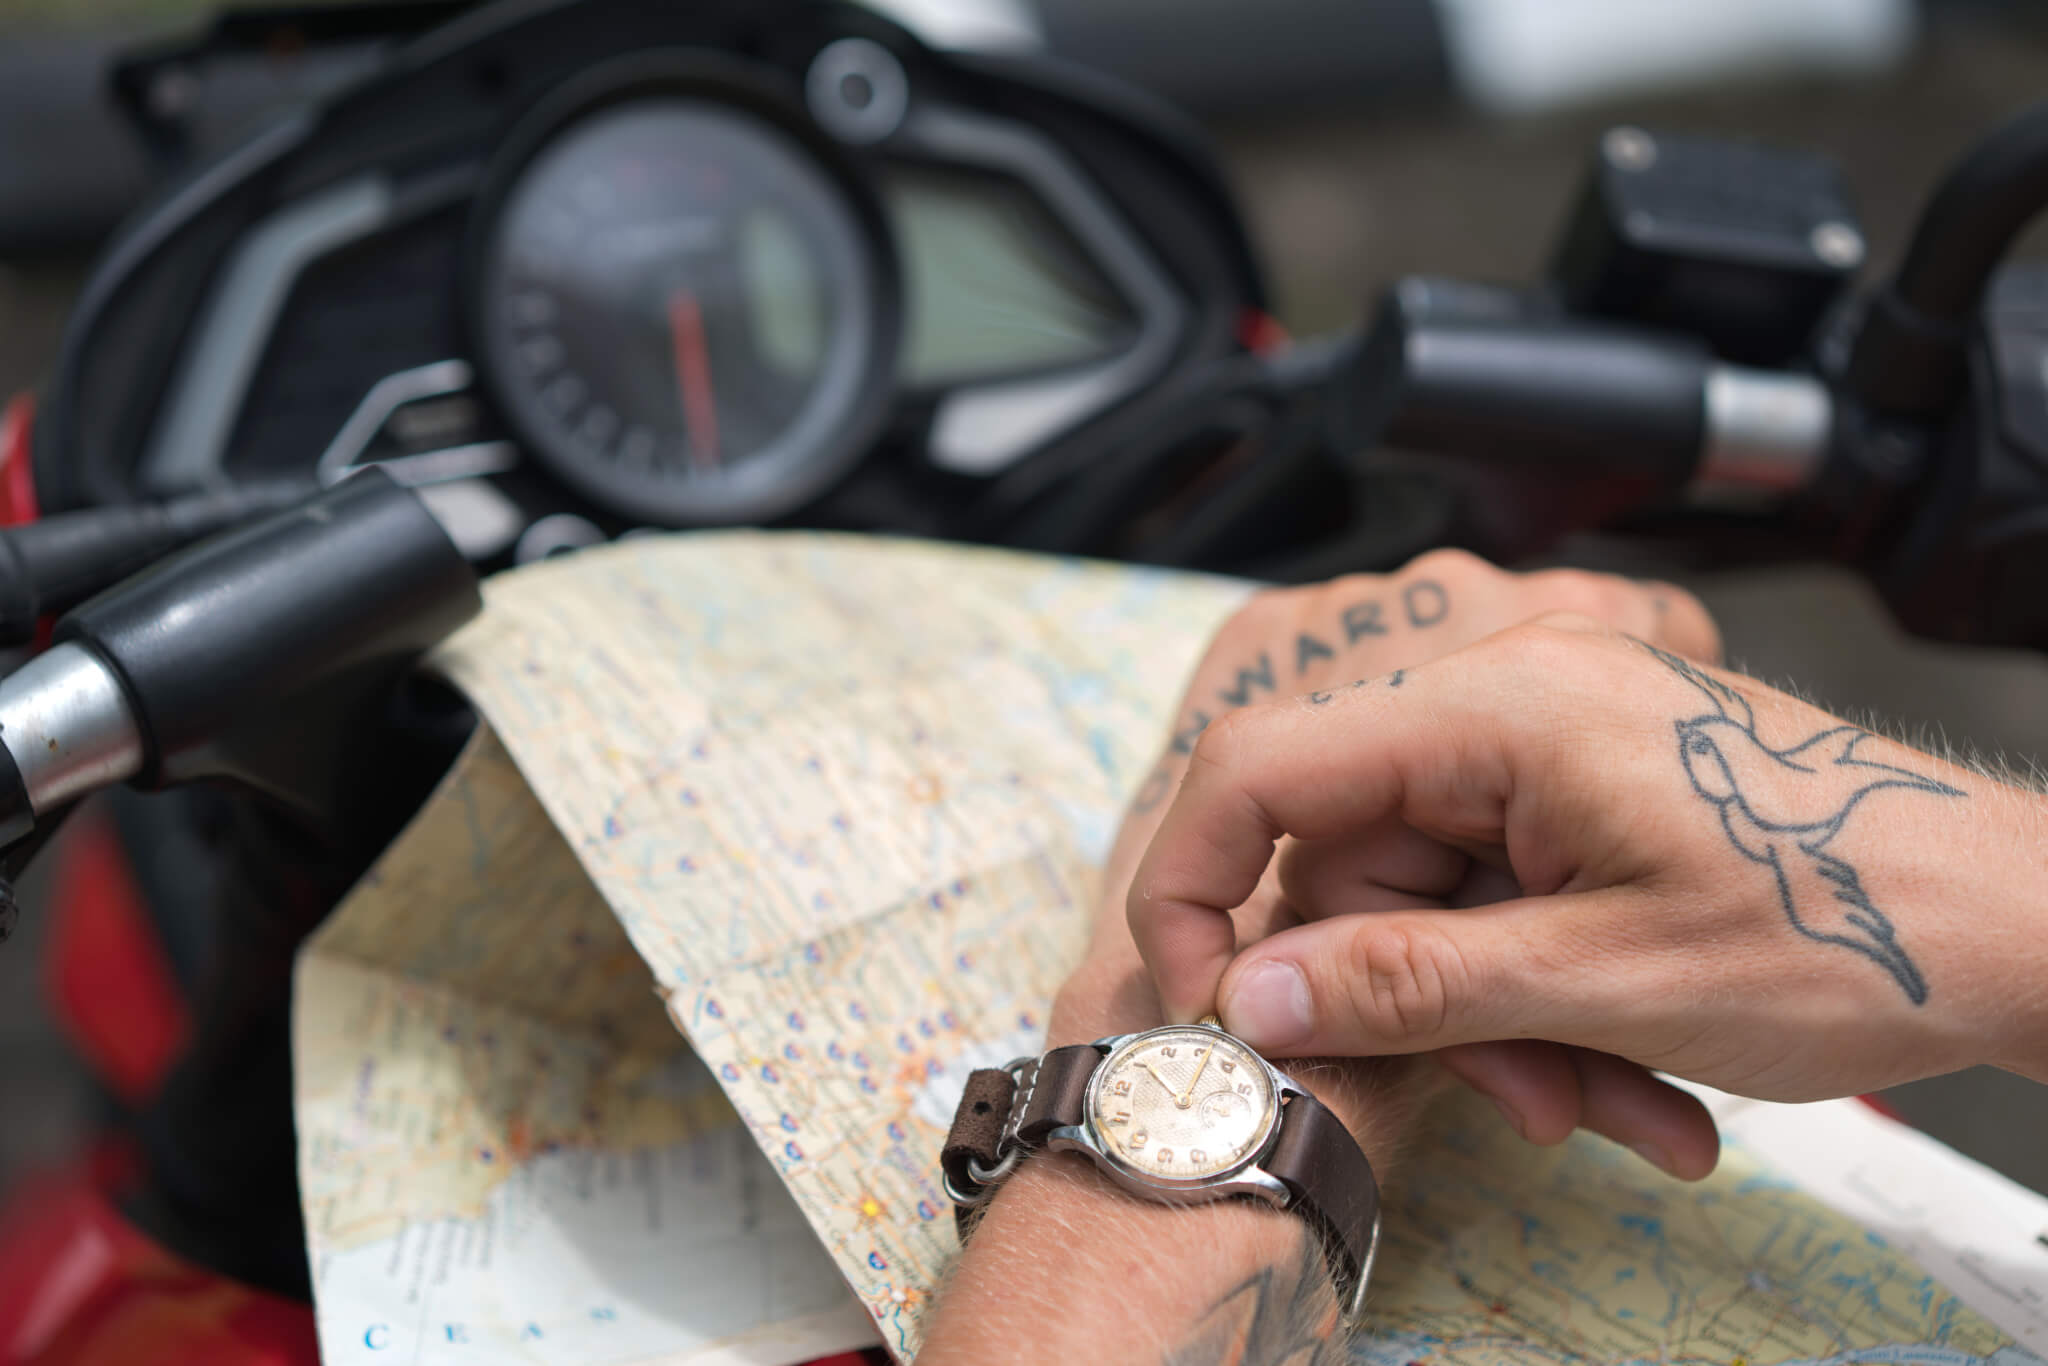 Crop tattooed man setting up watch against map and motorbike